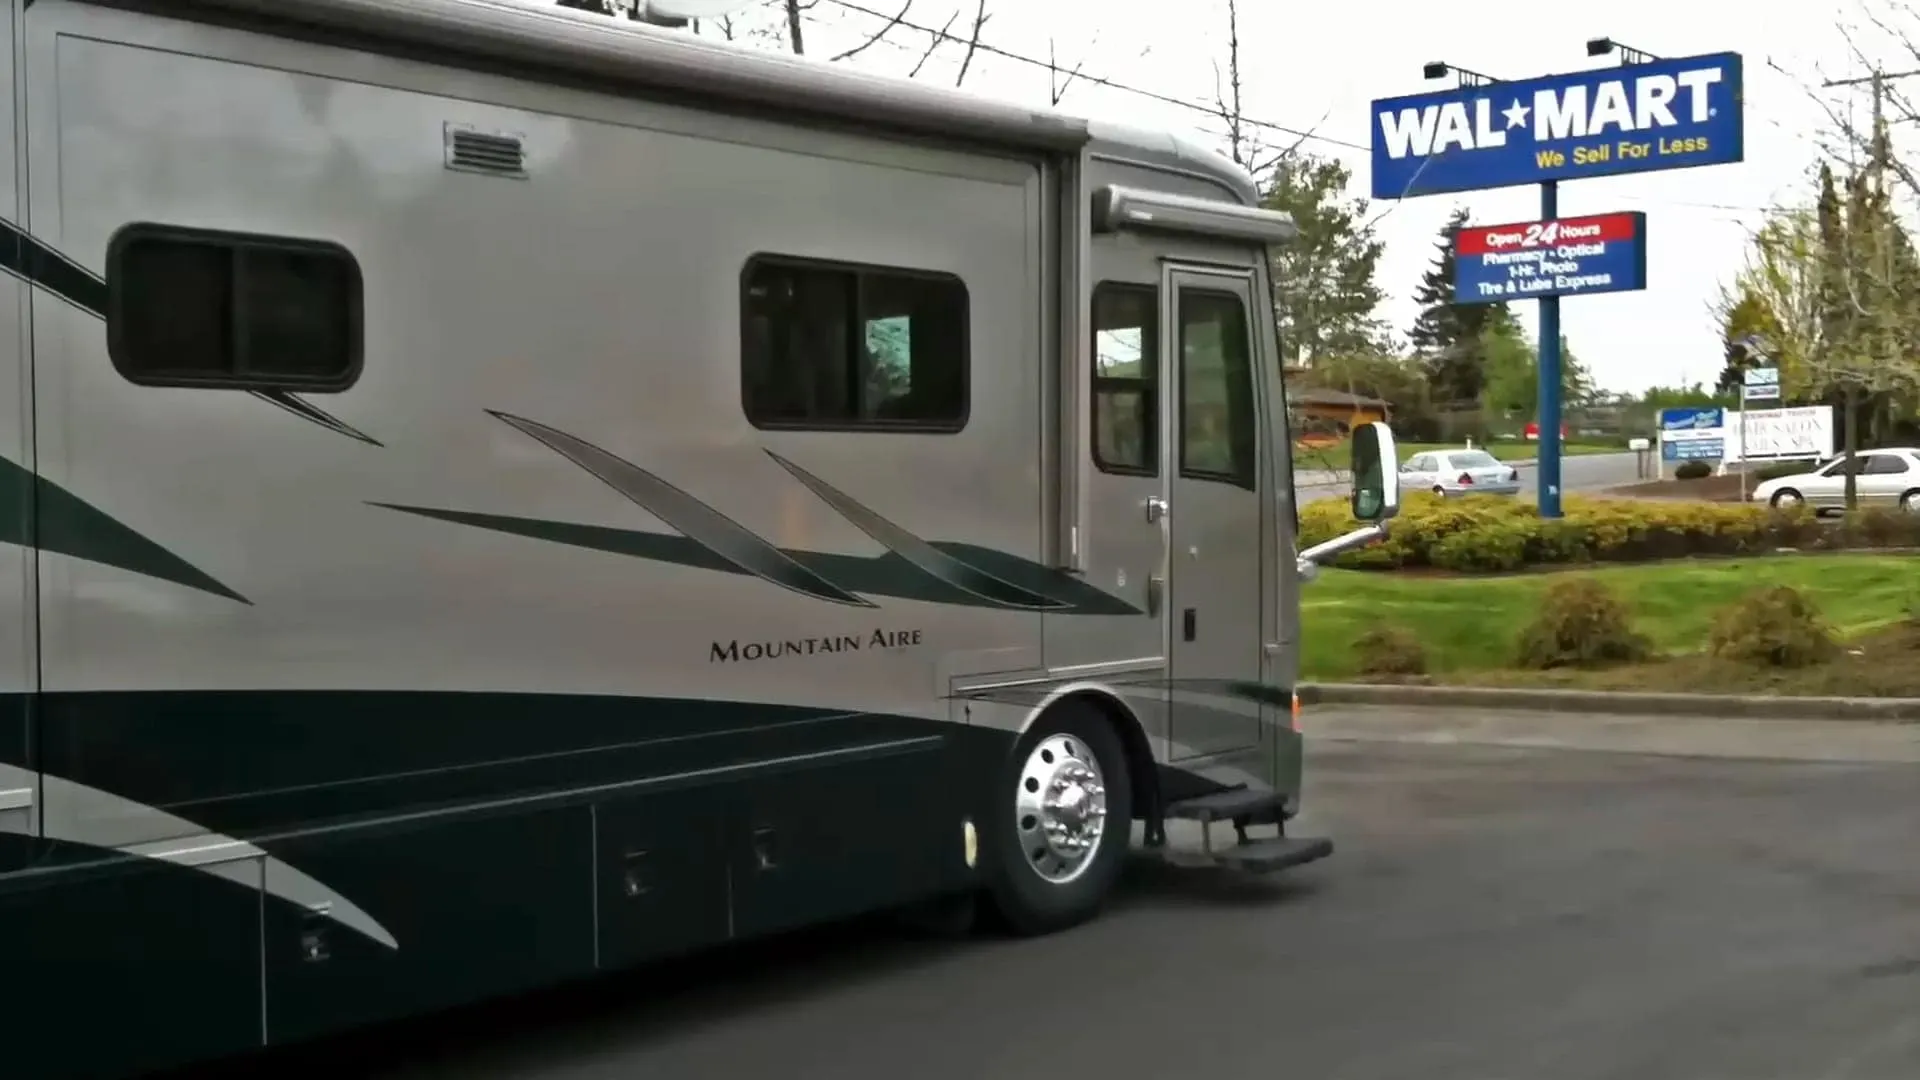 Free overnight RV parking in business lots offer tremendous conveniences for travelers.